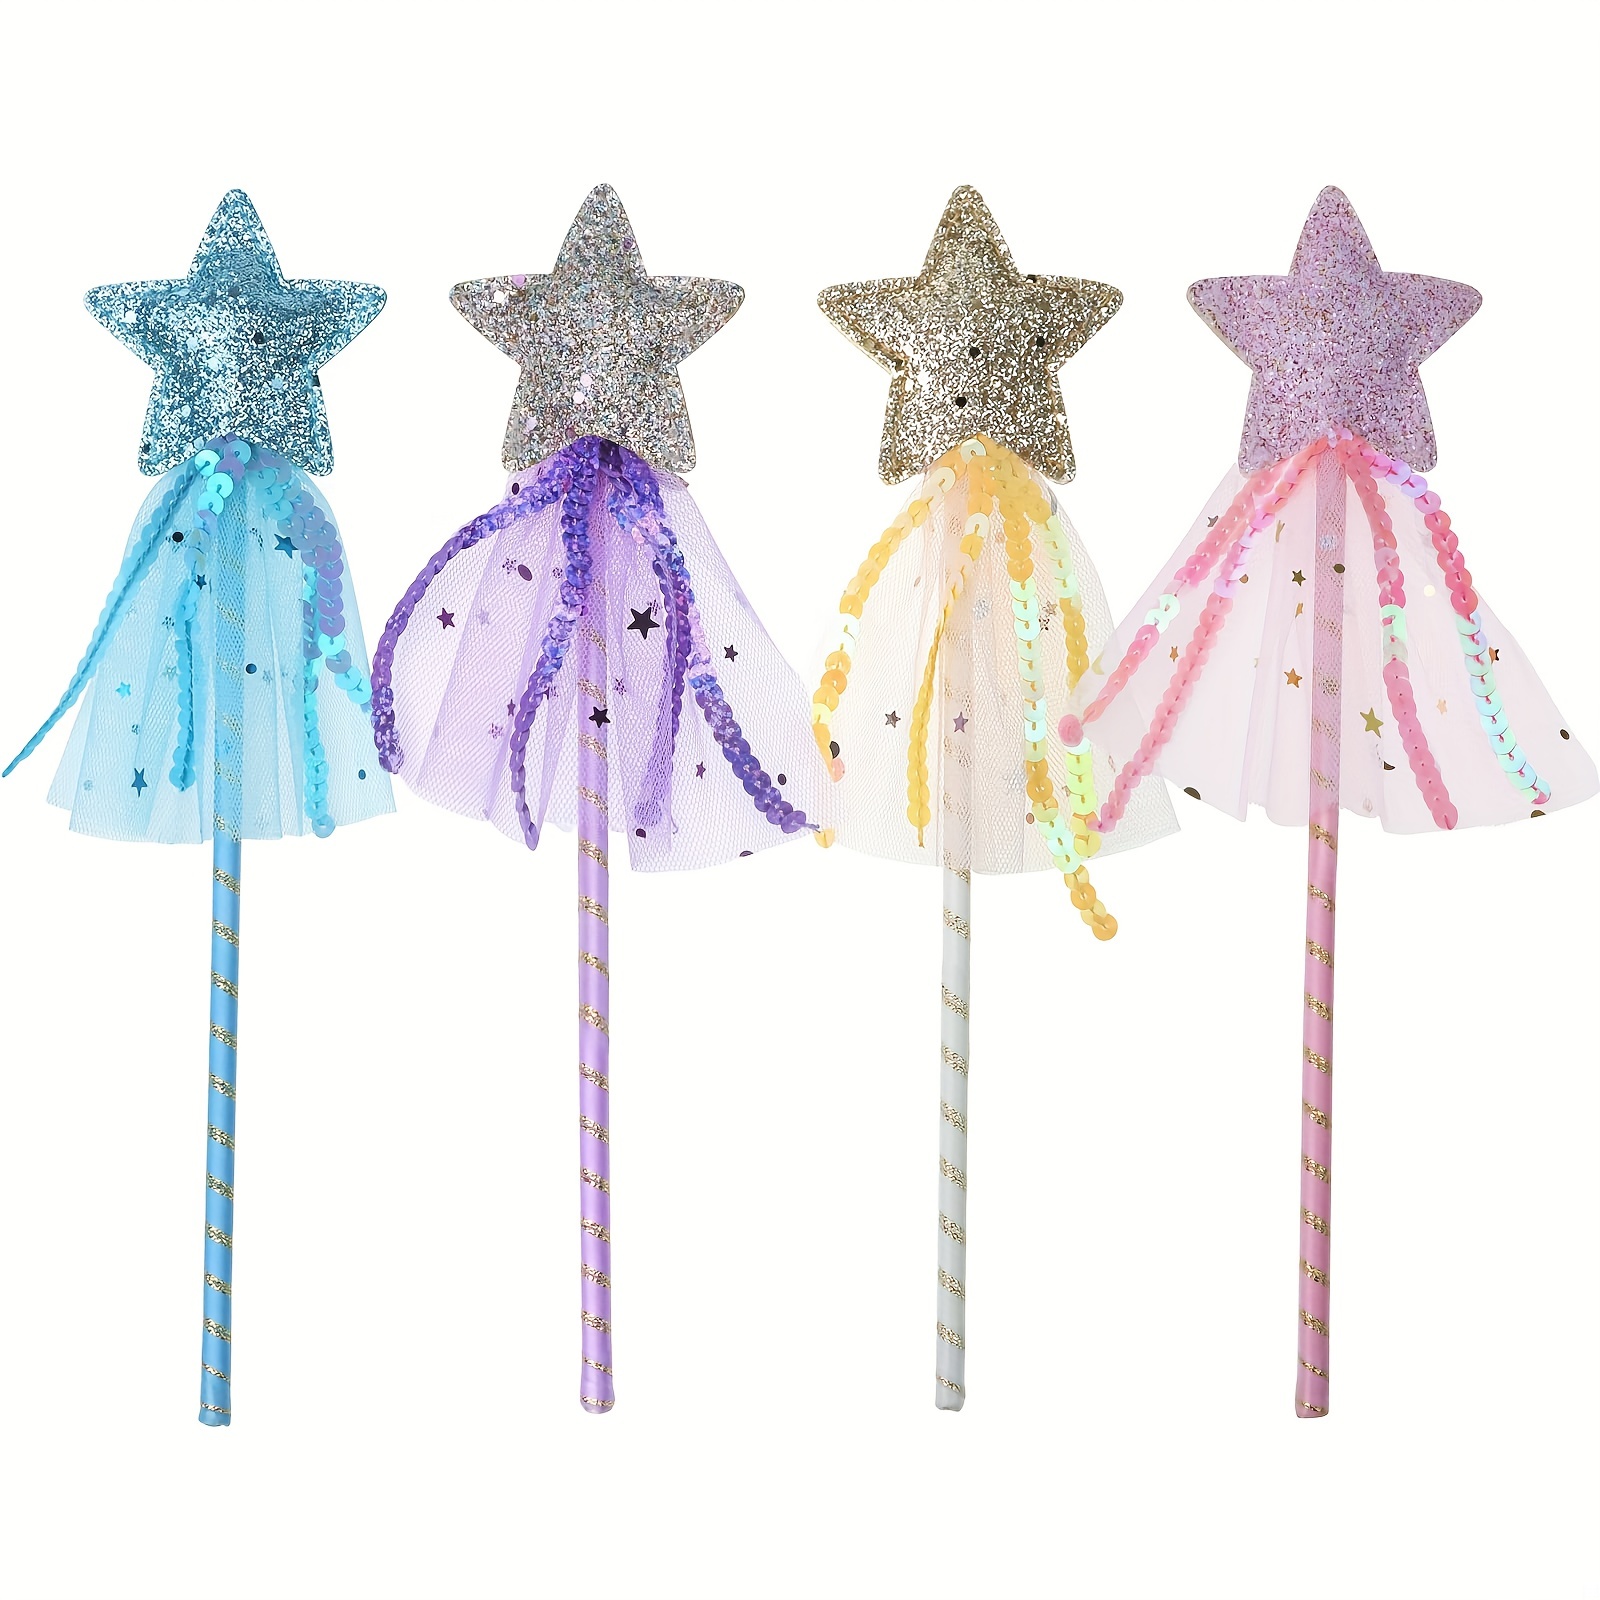 

4pcs Fairy Wands For Girls Bulk Princess Wands For Kids Wand For Party Cosplay Costume Wedding Party Birthday Party Role Play Halloween Christmas Supplies, Pink, Purple, Gold, Blue